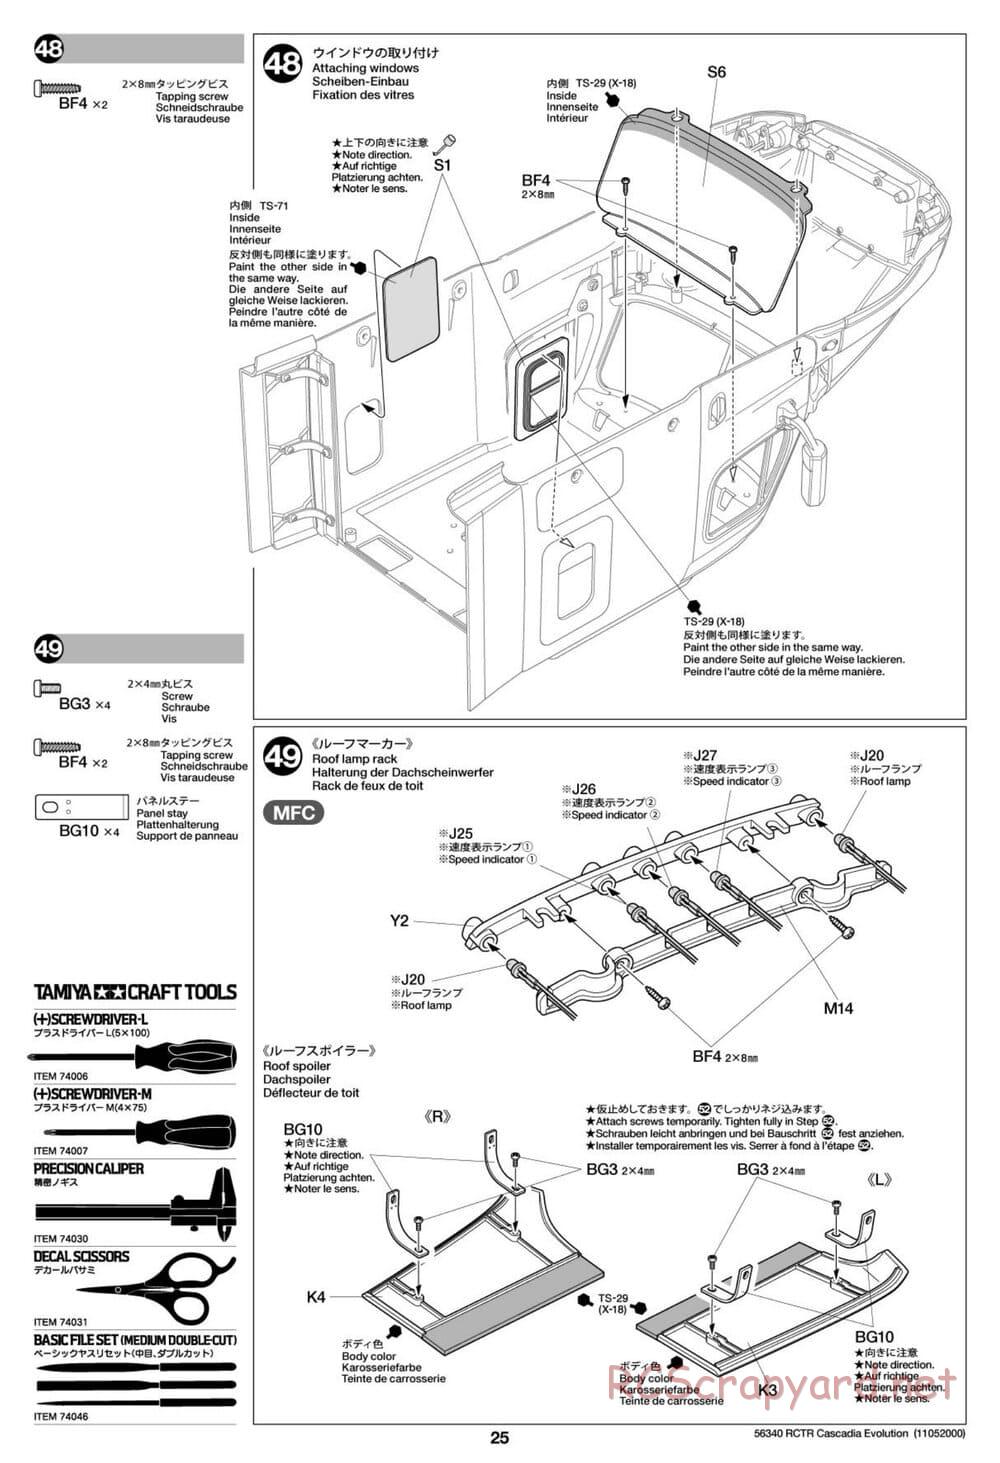 Tamiya - Freightliner Cascadia Evolution Tractor Truck Chassis - Manual - Page 25